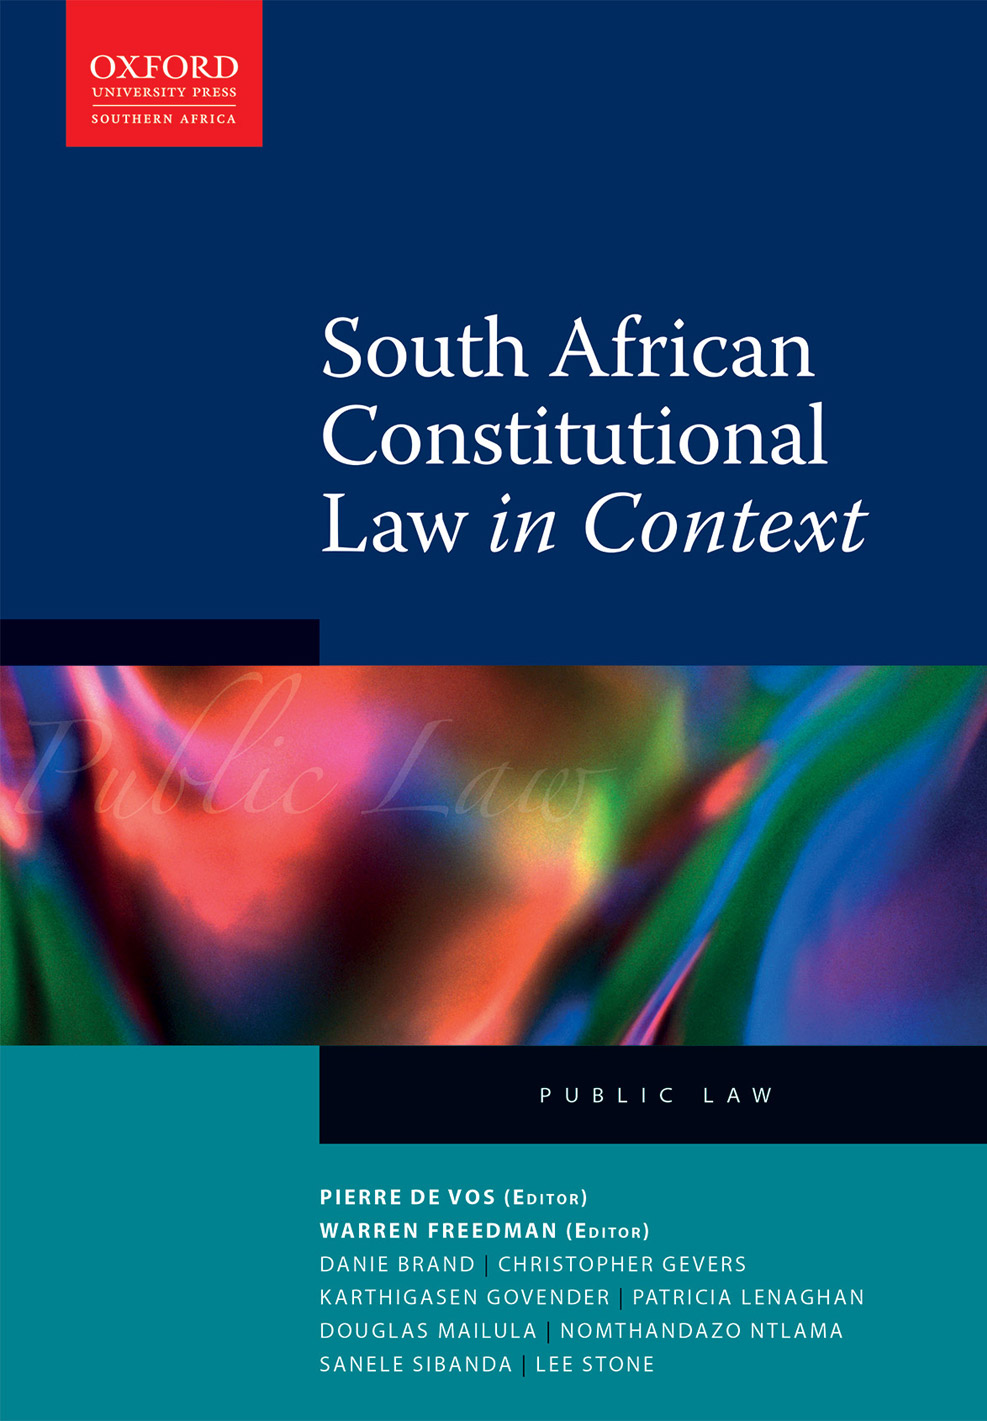 9780195991376_South-African-Constitutional-Law_cov (3)